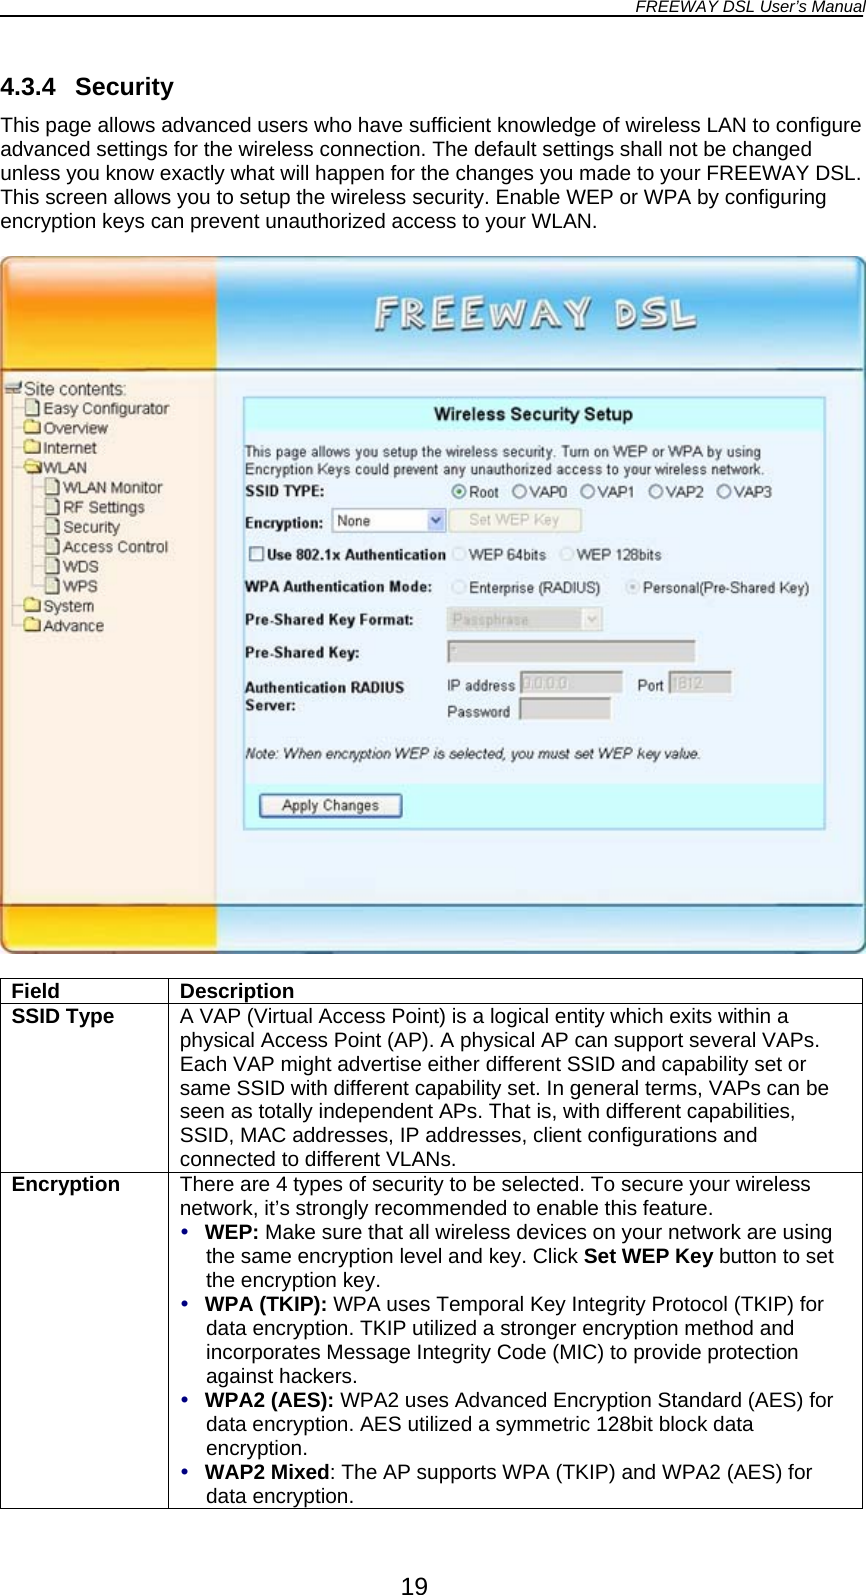 FREEWAY DSL User’s Manual  4.3.4 Security This page allows advanced users who have sufficient knowledge of wireless LAN to configure advanced settings for the wireless connection. The default settings shall not be changed unless you know exactly what will happen for the changes you made to your FREEWAY DSL. This screen allows you to setup the wireless security. Enable WEP or WPA by configuring encryption keys can prevent unauthorized access to your WLAN.    Field Description SSID Type  A VAP (Virtual Access Point) is a logical entity which exits within a physical Access Point (AP). A physical AP can support several VAPs. Each VAP might advertise either different SSID and capability set or same SSID with different capability set. In general terms, VAPs can be seen as totally independent APs. That is, with different capabilities, SSID, MAC addresses, IP addresses, client configurations and connected to different VLANs. Encryption  There are 4 types of security to be selected. To secure your wireless network, it’s strongly recommended to enable this feature.  WEP: Make sure that all wireless devices on your network are using the same encryption level and key. Click Set WEP Key button to set the encryption key.  WPA (TKIP): WPA uses Temporal Key Integrity Protocol (TKIP) for data encryption. TKIP utilized a stronger encryption method and incorporates Message Integrity Code (MIC) to provide protection against hackers.  WPA2 (AES): WPA2 uses Advanced Encryption Standard (AES) for data encryption. AES utilized a symmetric 128bit block data encryption.  WAP2 Mixed: The AP supports WPA (TKIP) and WPA2 (AES) for data encryption. 19 